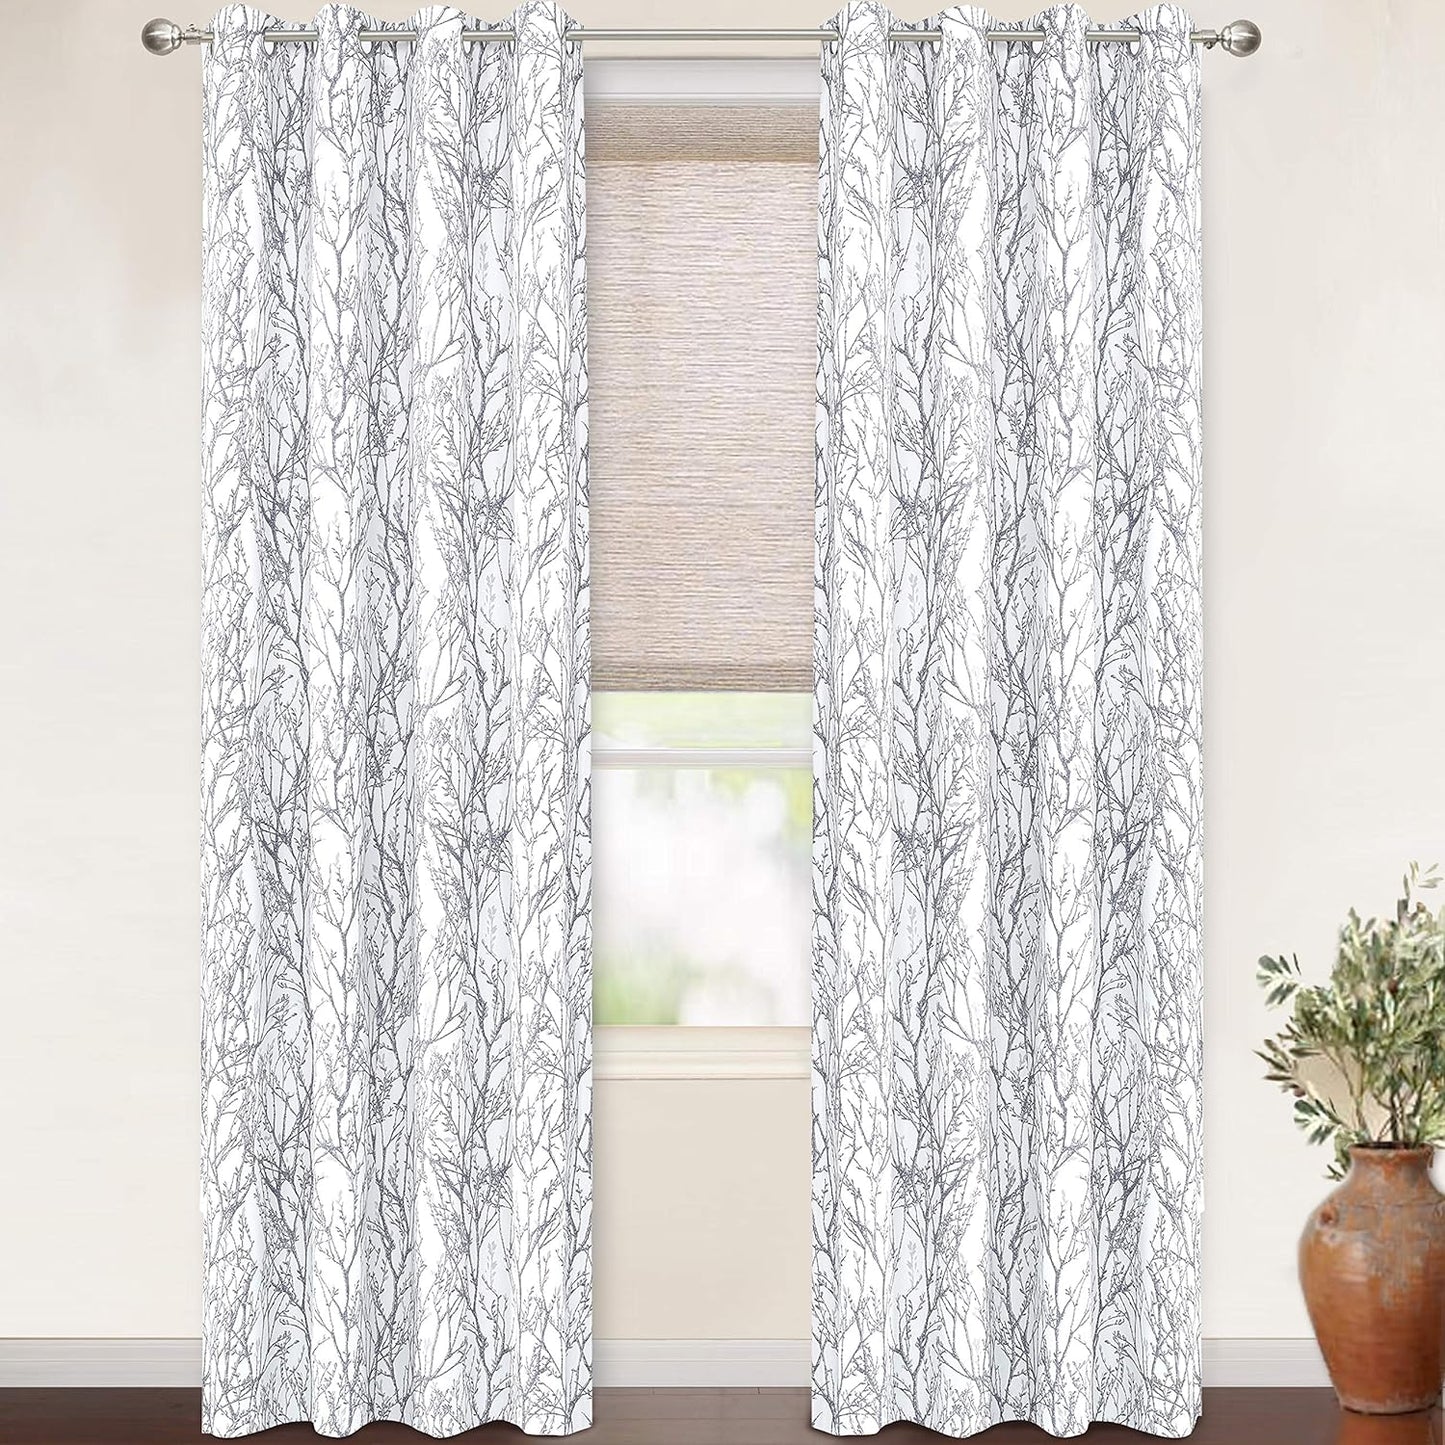 Driftaway Gray White Tree Branch Blackout Curtains for Bedroom Curtains 84 Inch Length 2 Panels Set Grey Branch Lined Window Treatment Thermal Grommet Top Curtain for Living Room Winter Warm Curtain  DriftAway Tree Branch-Gray 52"X108" 